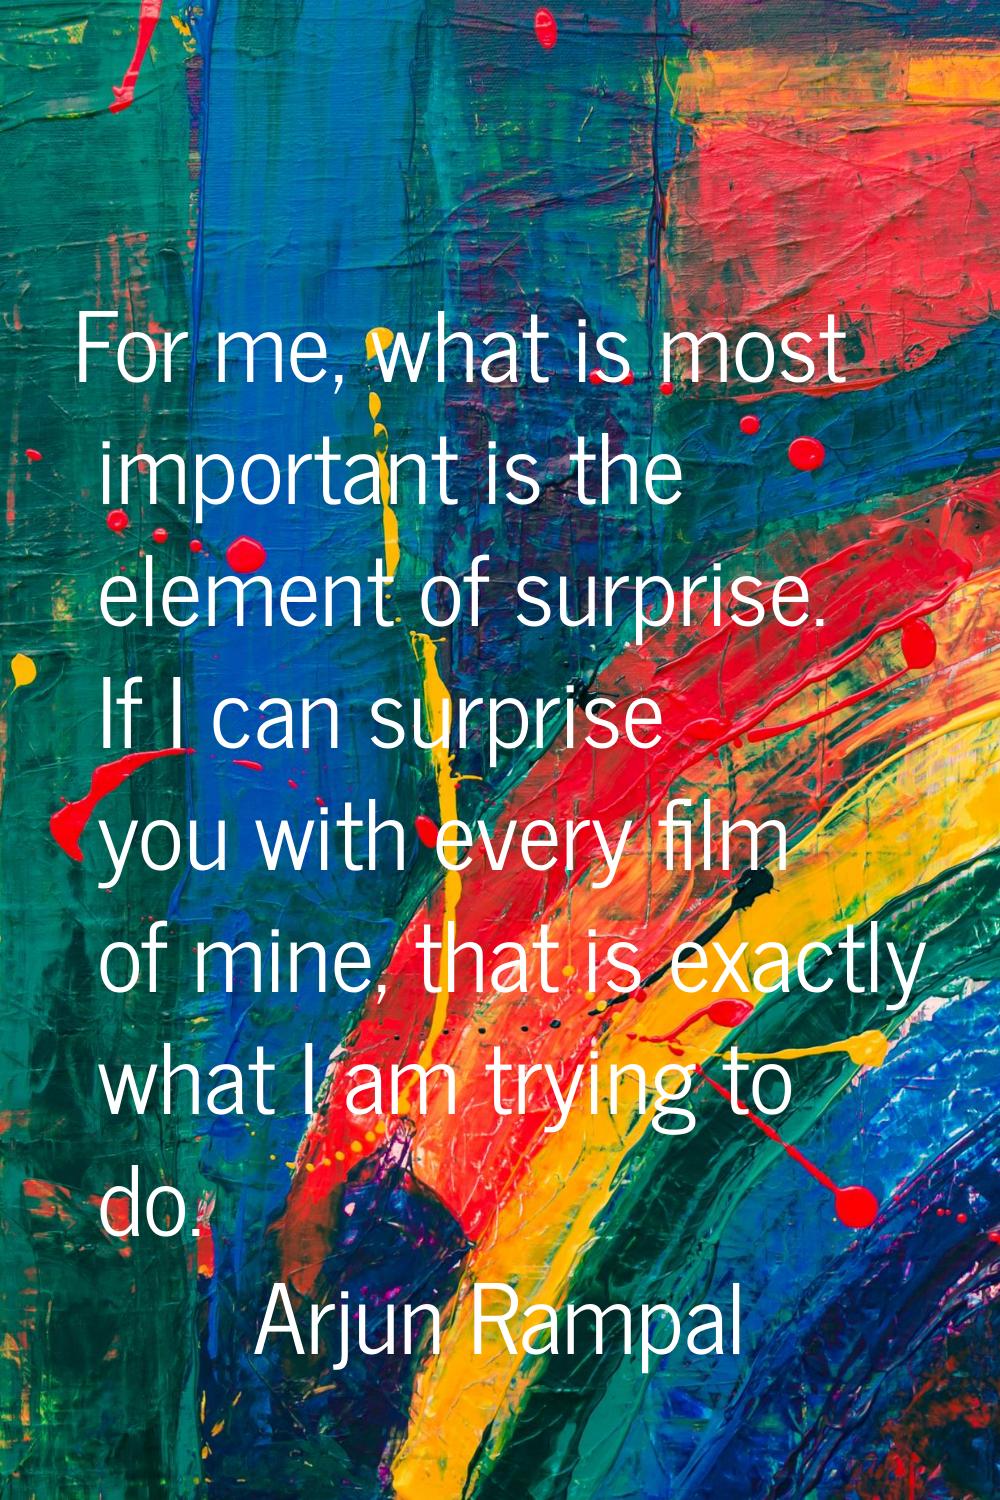 For me, what is most important is the element of surprise. If I can surprise you with every film of